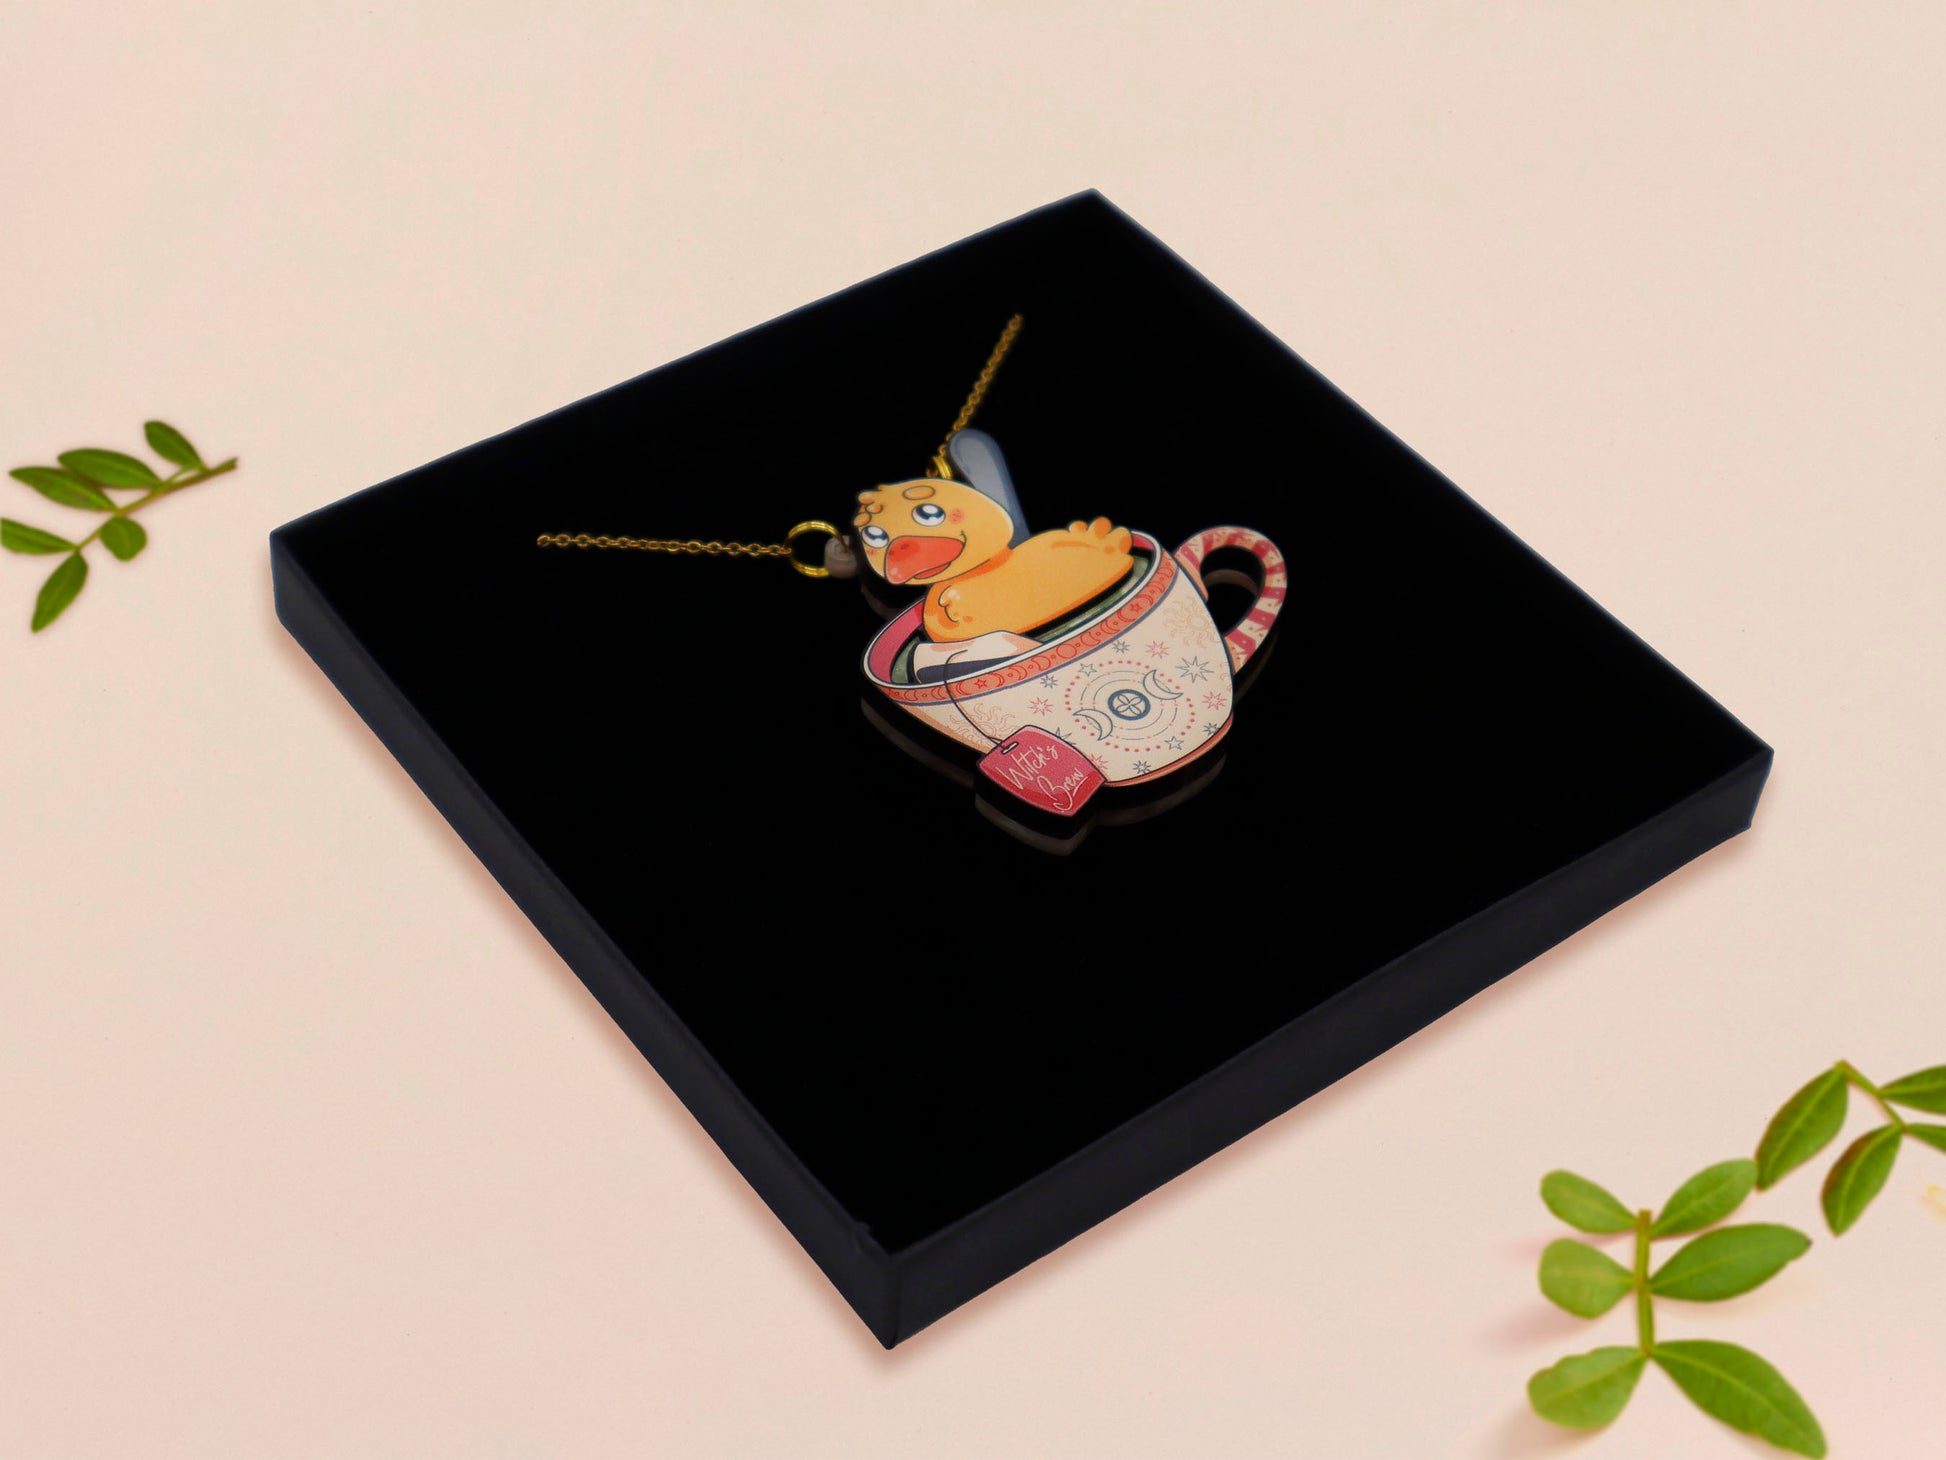 Mixed material handmade necklace of chibi cartoon duck sat in a pearlescent witch's brew teacup, with a gold chain and black gift box.